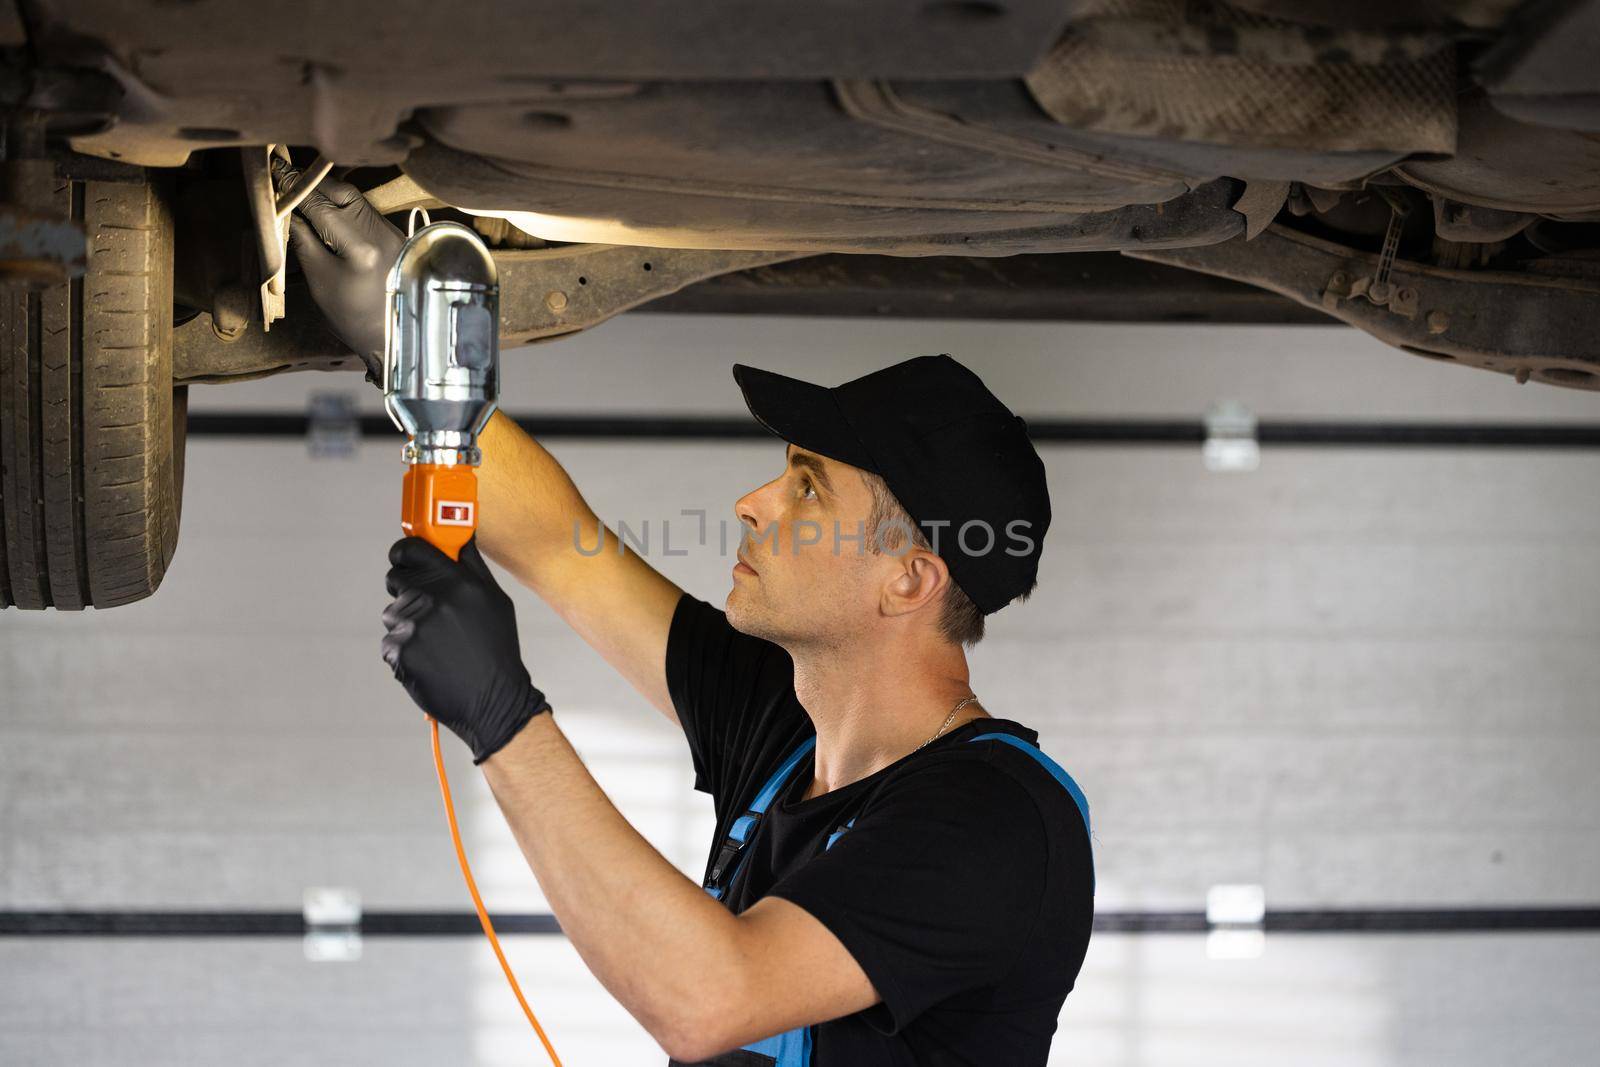 Male car mechanic checking car. Auto mechanic working underneath car lifting machine at the garage. Working in car repair shop and running small feminine business concept.